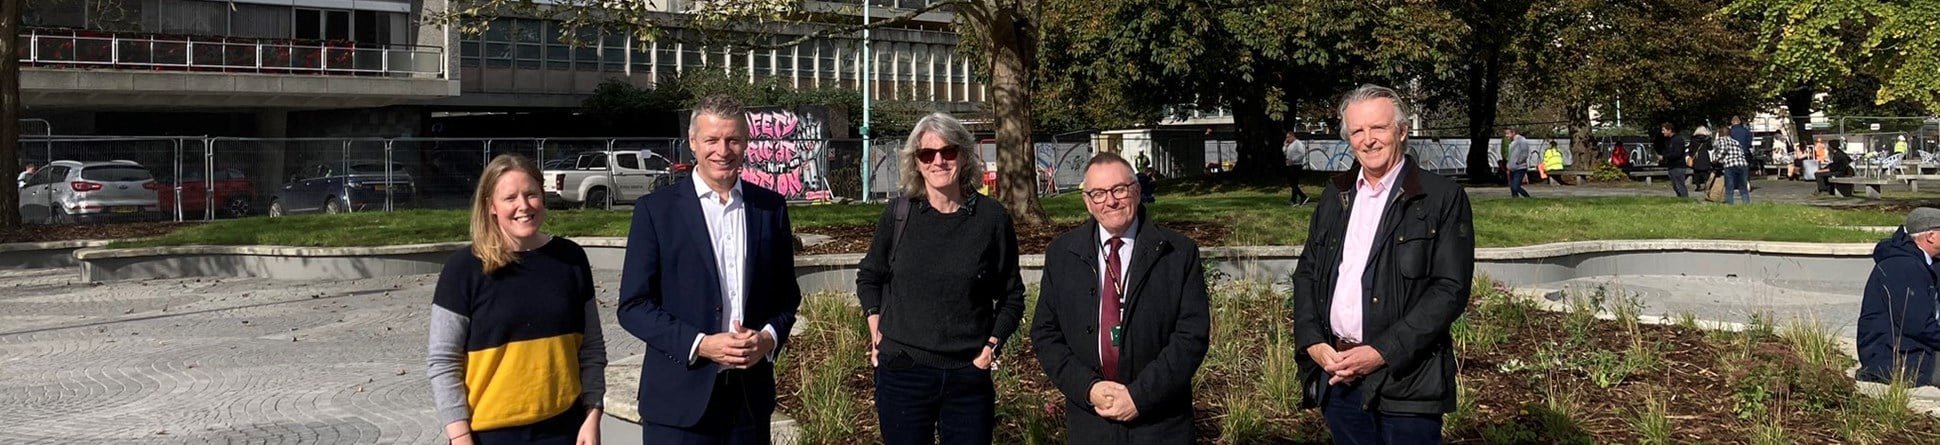 Five people visit Plymouth's Civic Square with newly repaired paving and street furniture